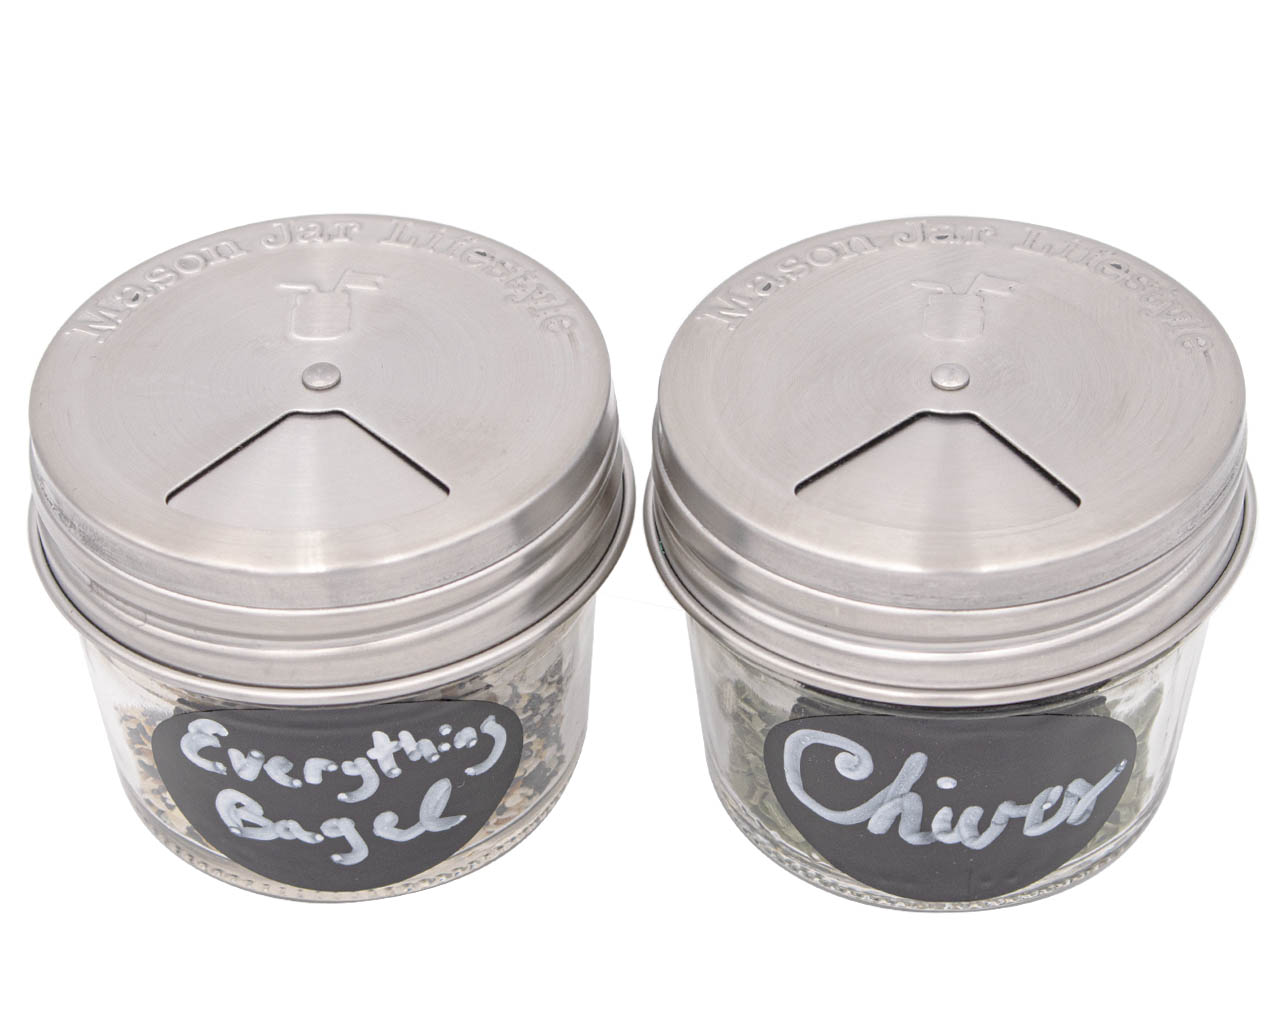 https://masonjarlifestyle.com/cdn/shop/files/mason-jar-lifestyle-regular-mouth-stainless-steel-spice-shaker-lid-4oz-ball-everything-seeds-herbs-spices-chives-labeled.jpg?v=1695767613&width=1280